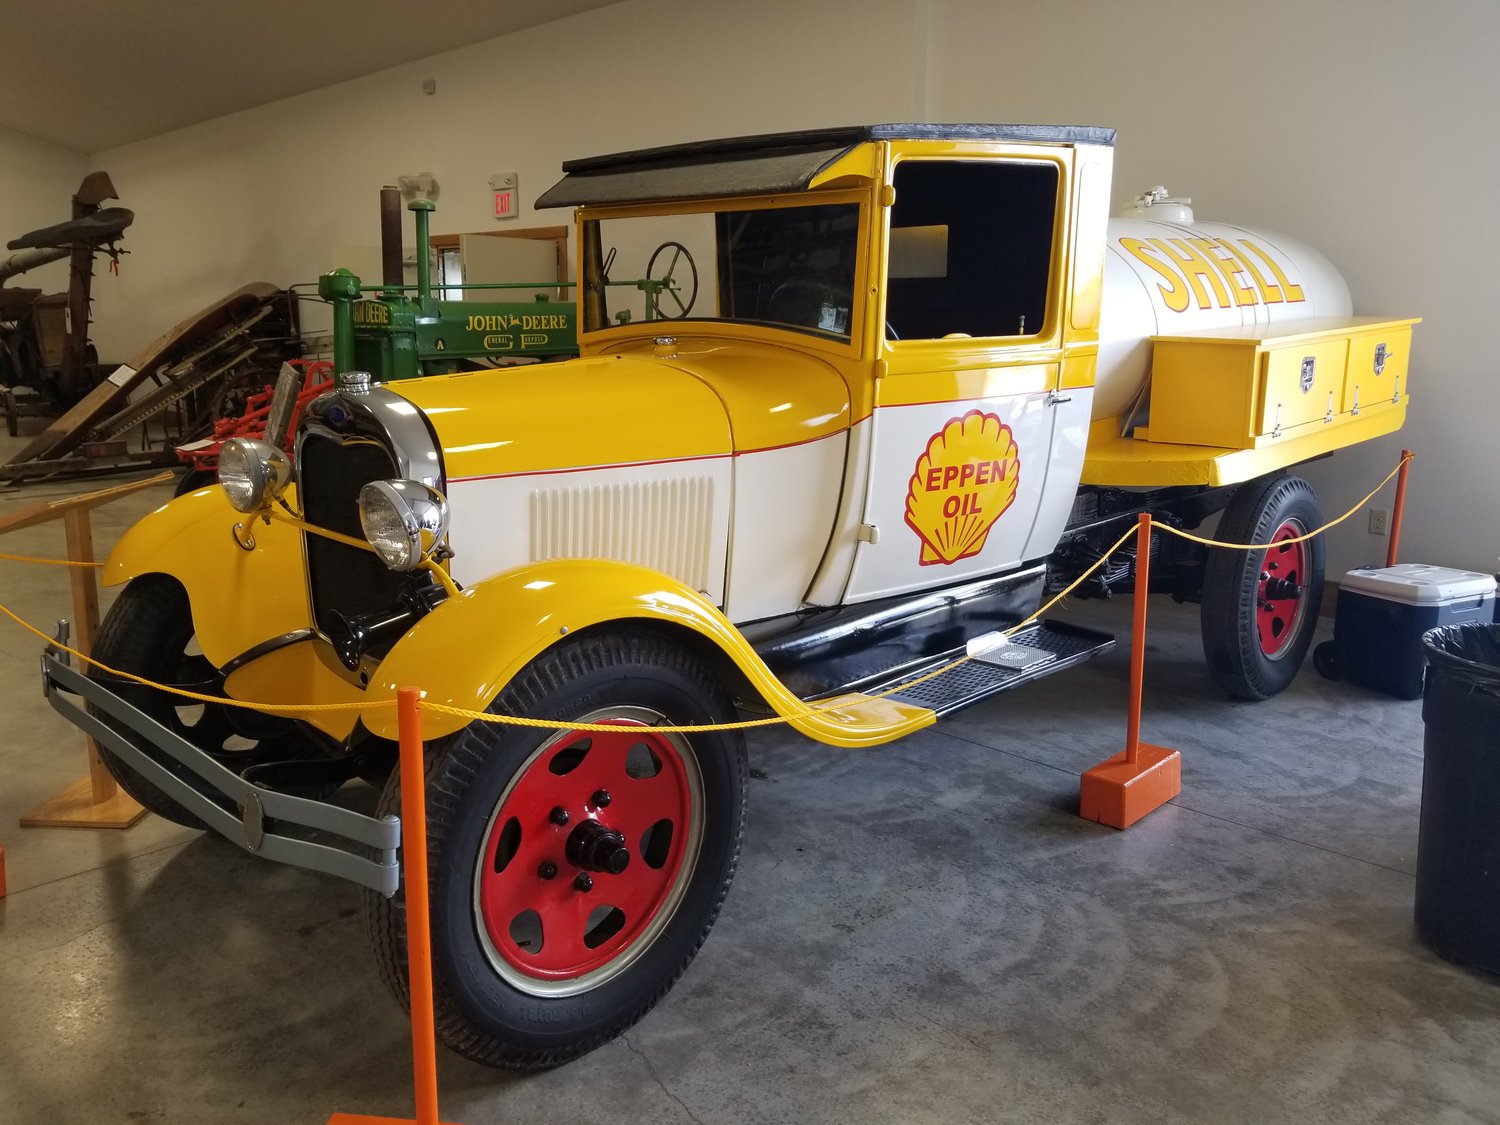 This tanker truck was restored by Bob Eppen and is on loan to the museum this summer.  Bob purchased it from Mayowood in Rochester where prior to the restoration, they used it in photo shoots at parties and receptions.